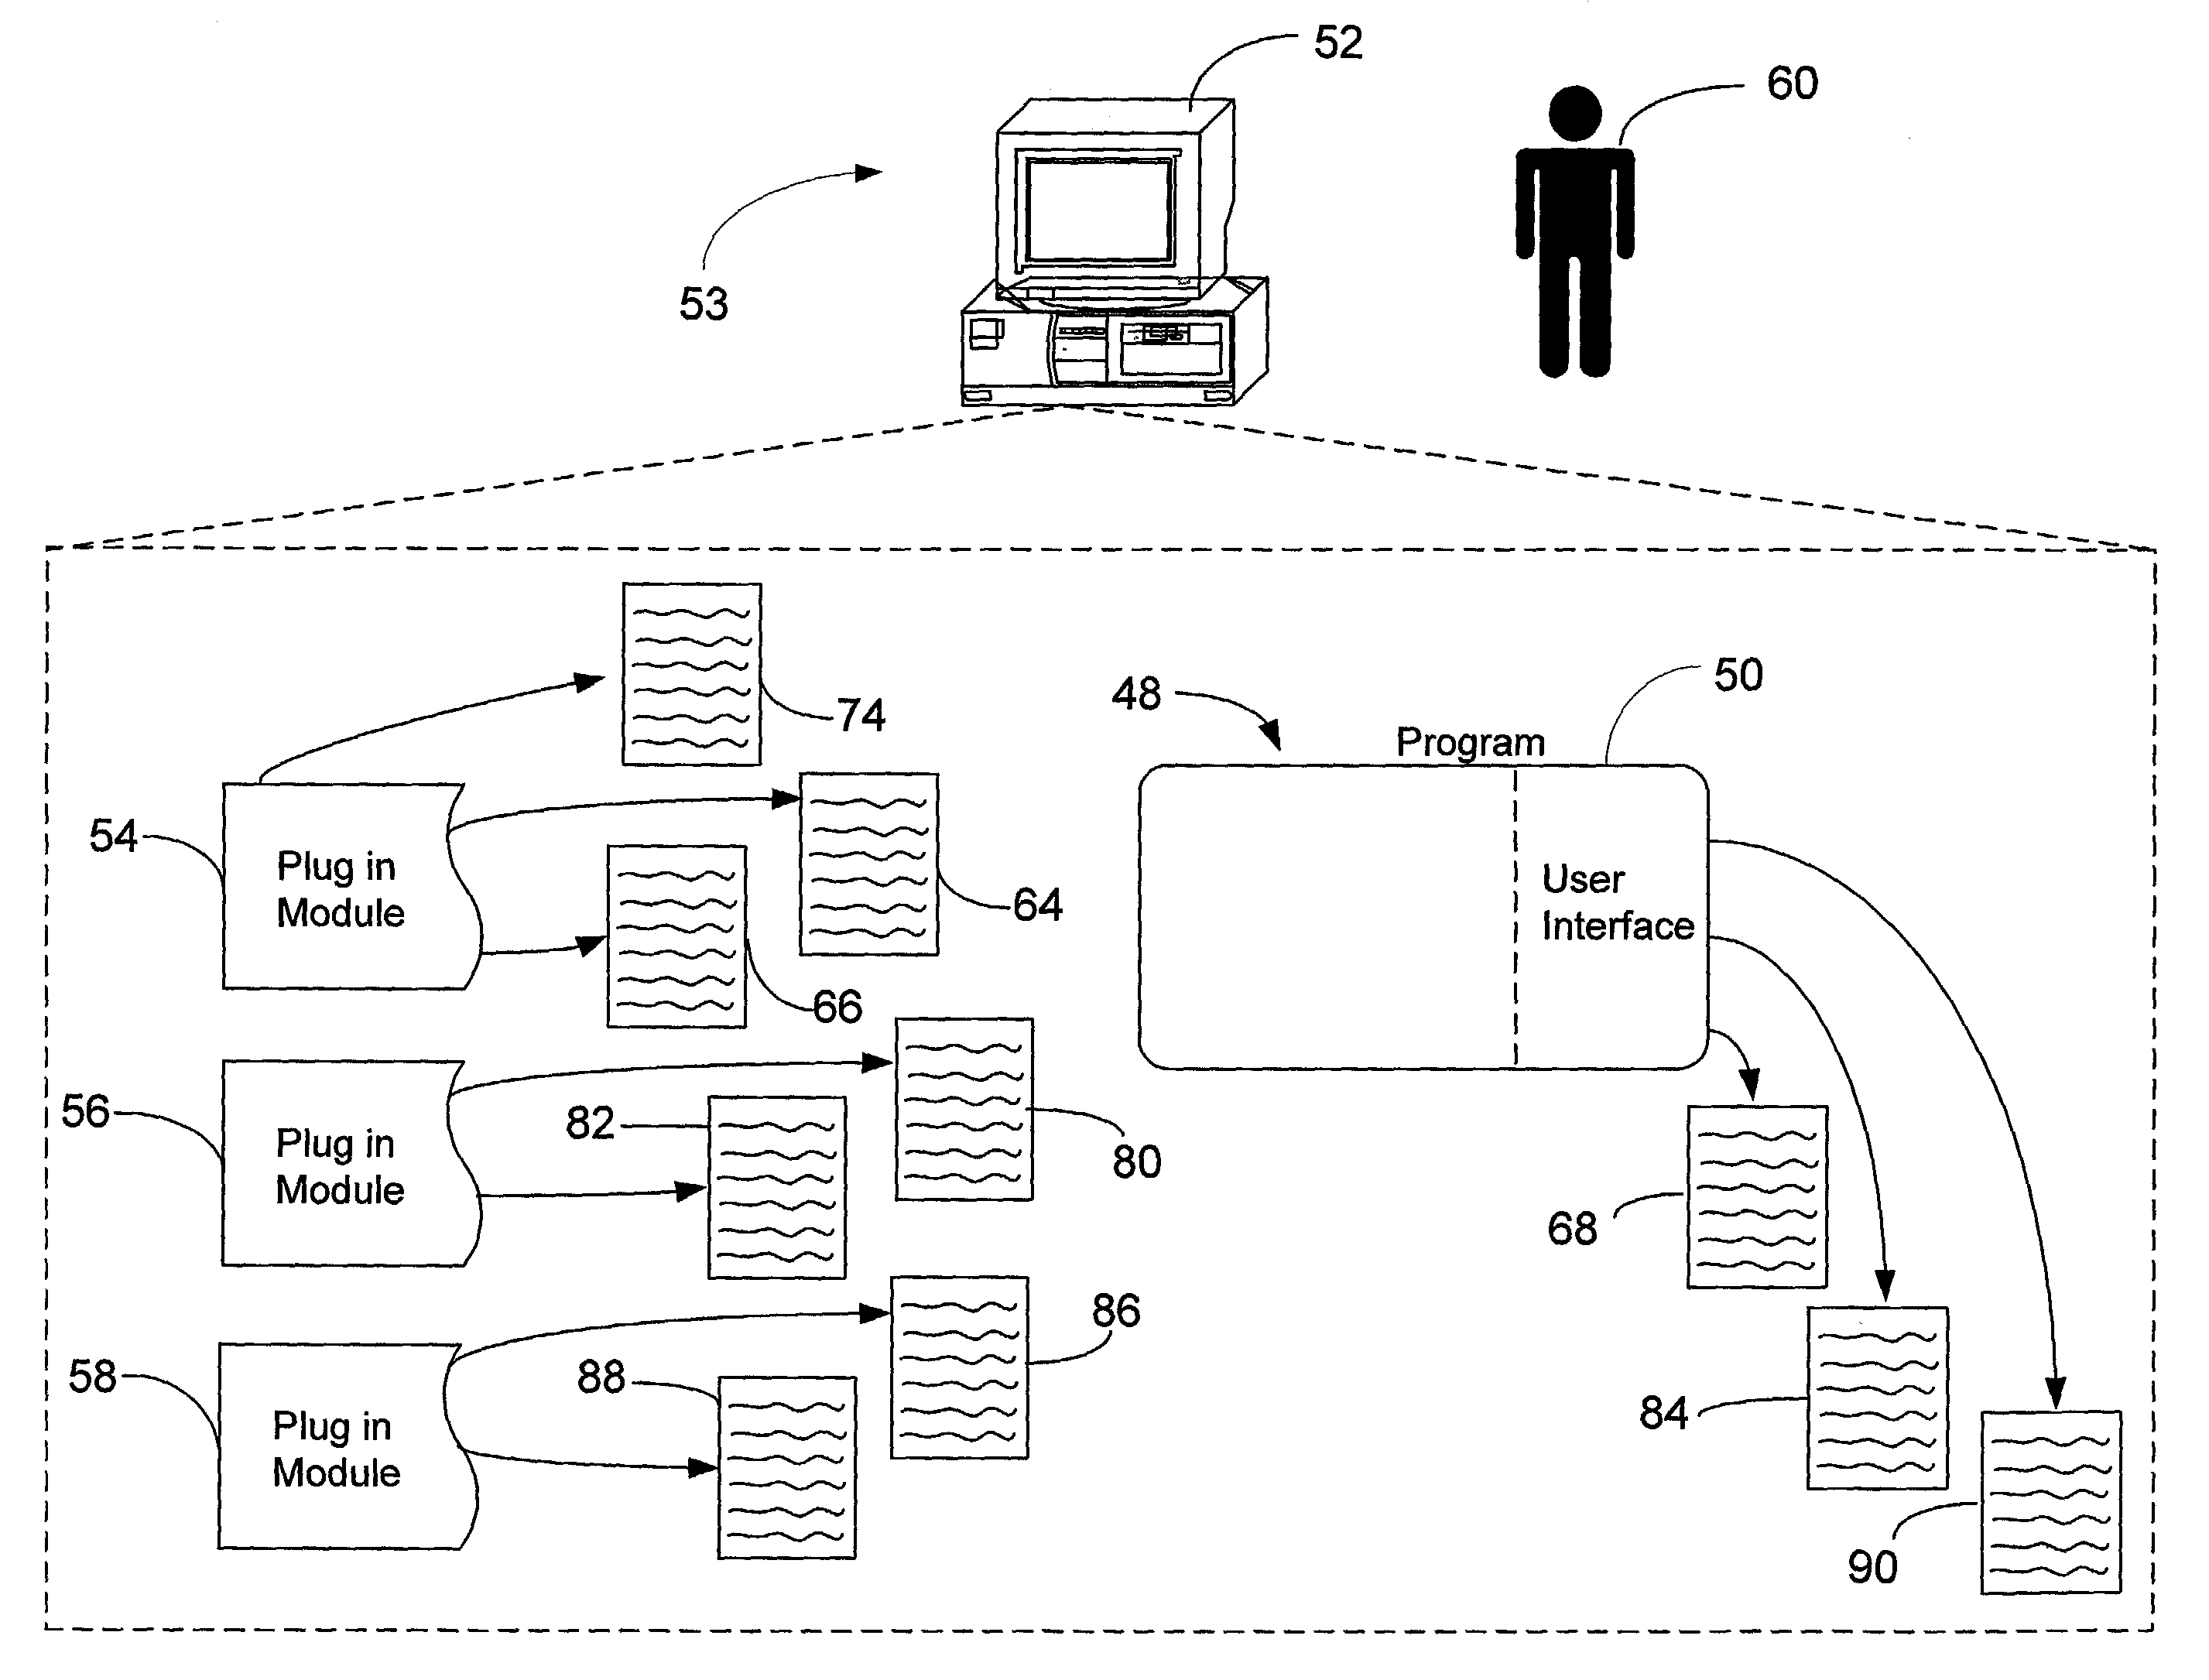 Method and system for displaying information on a user interface